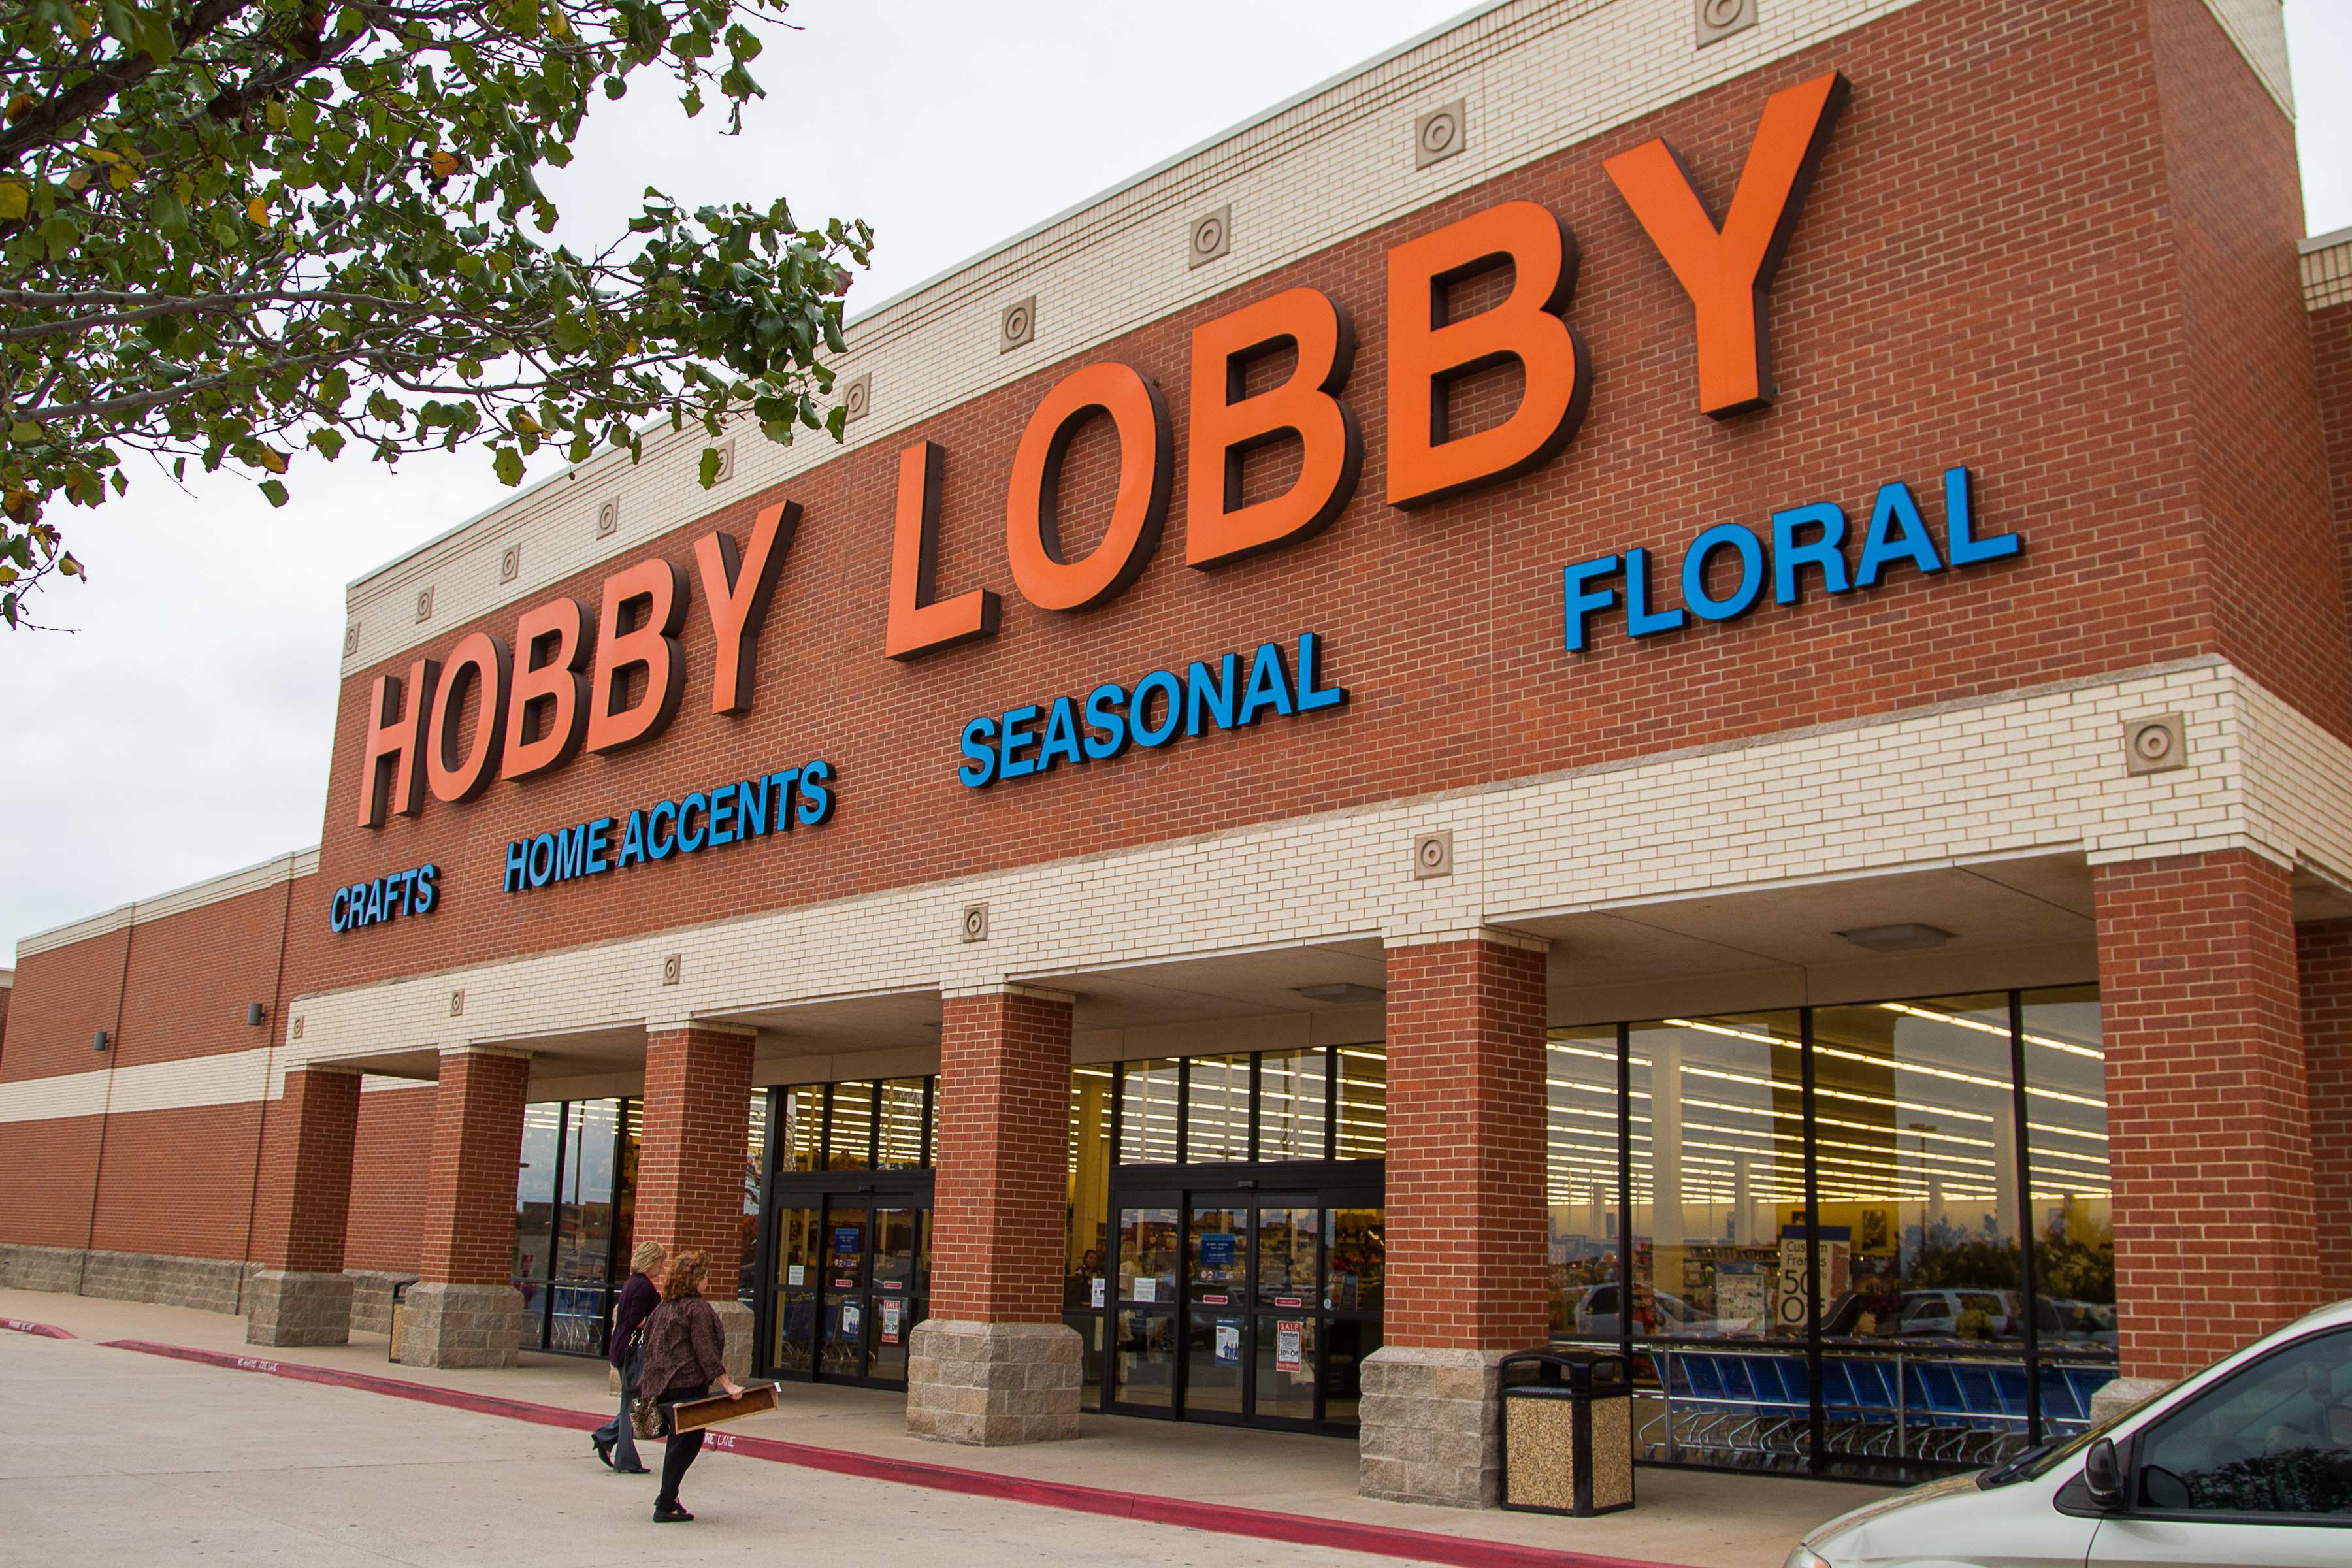 Hobby Lobby: The Clash Between Equality, Women’s Rights and Religious Freedom